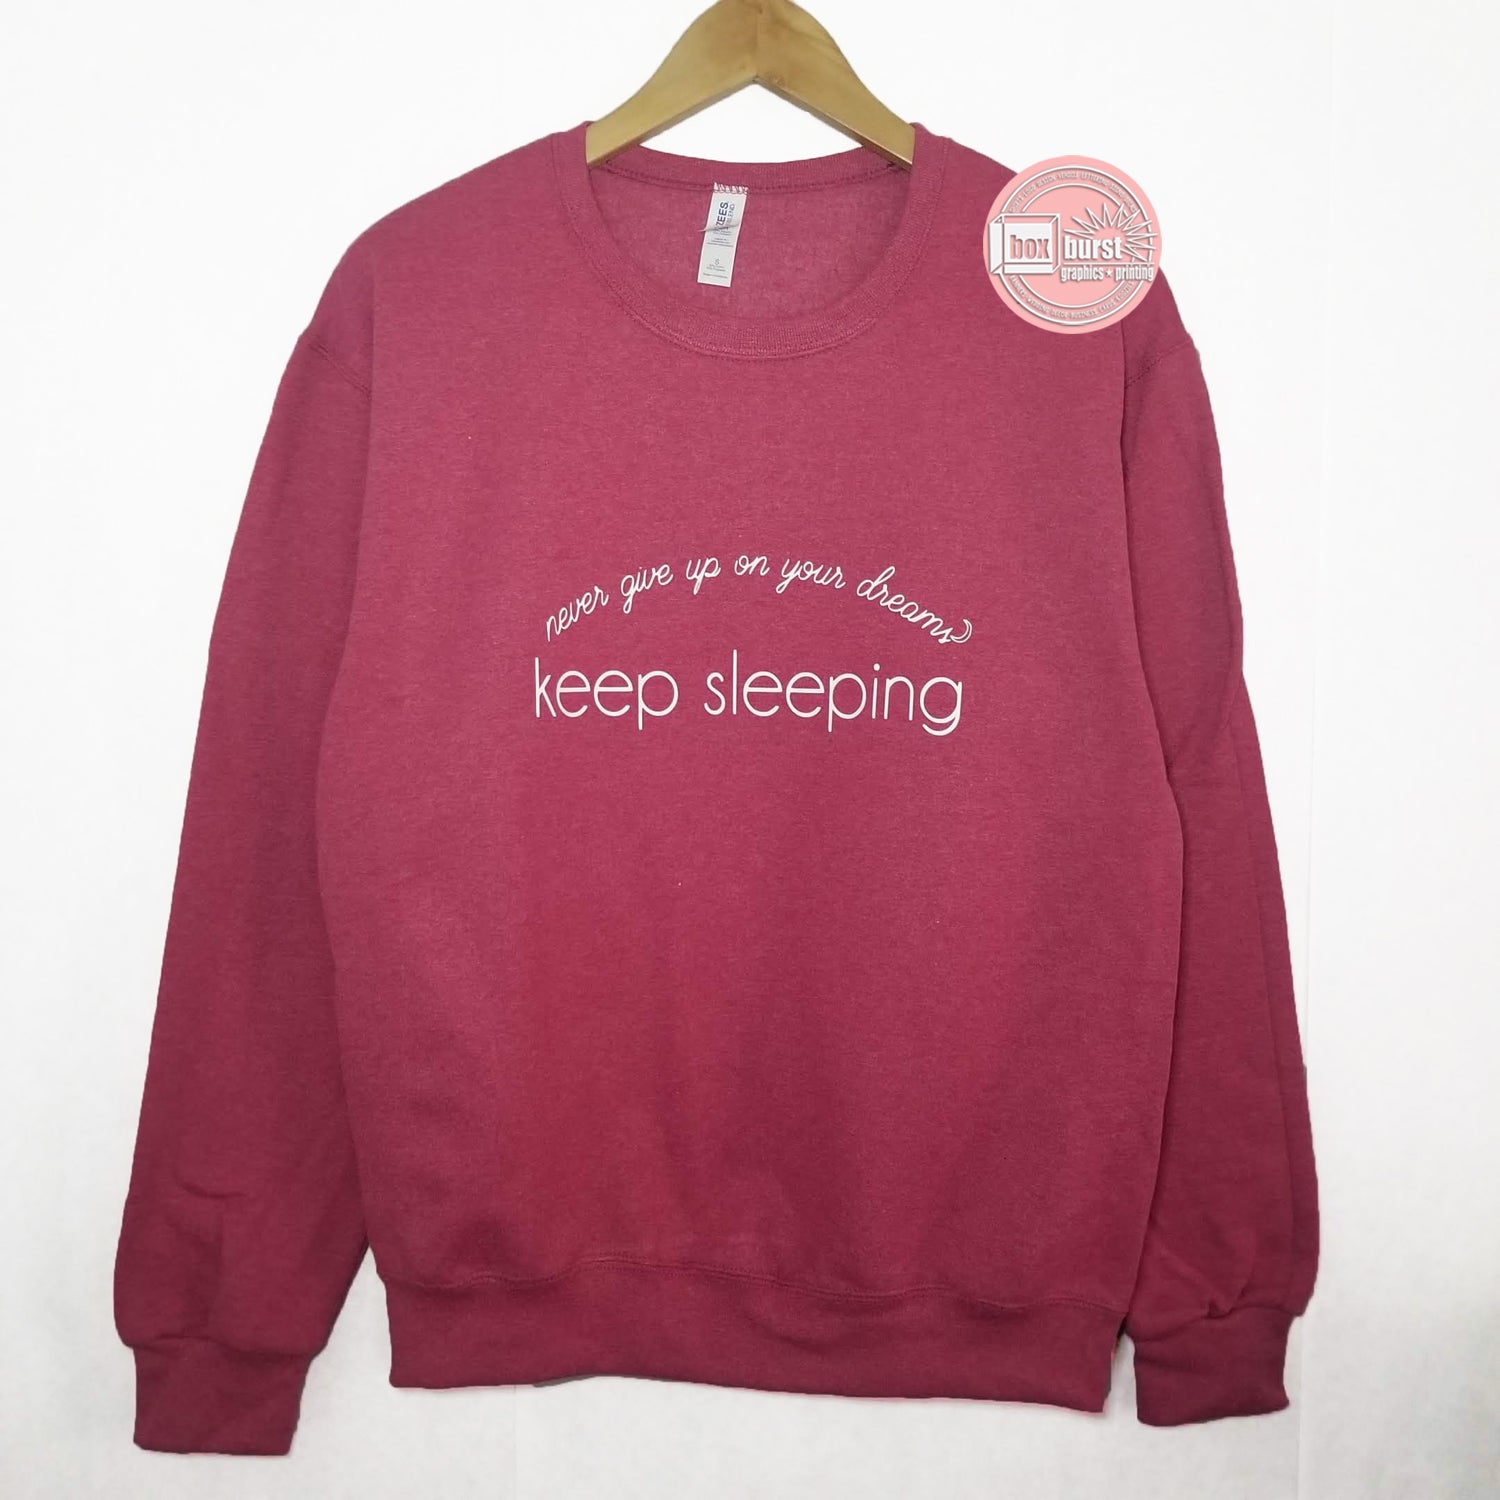 Never give up on your dreams, keep sleeping crew neck sweater